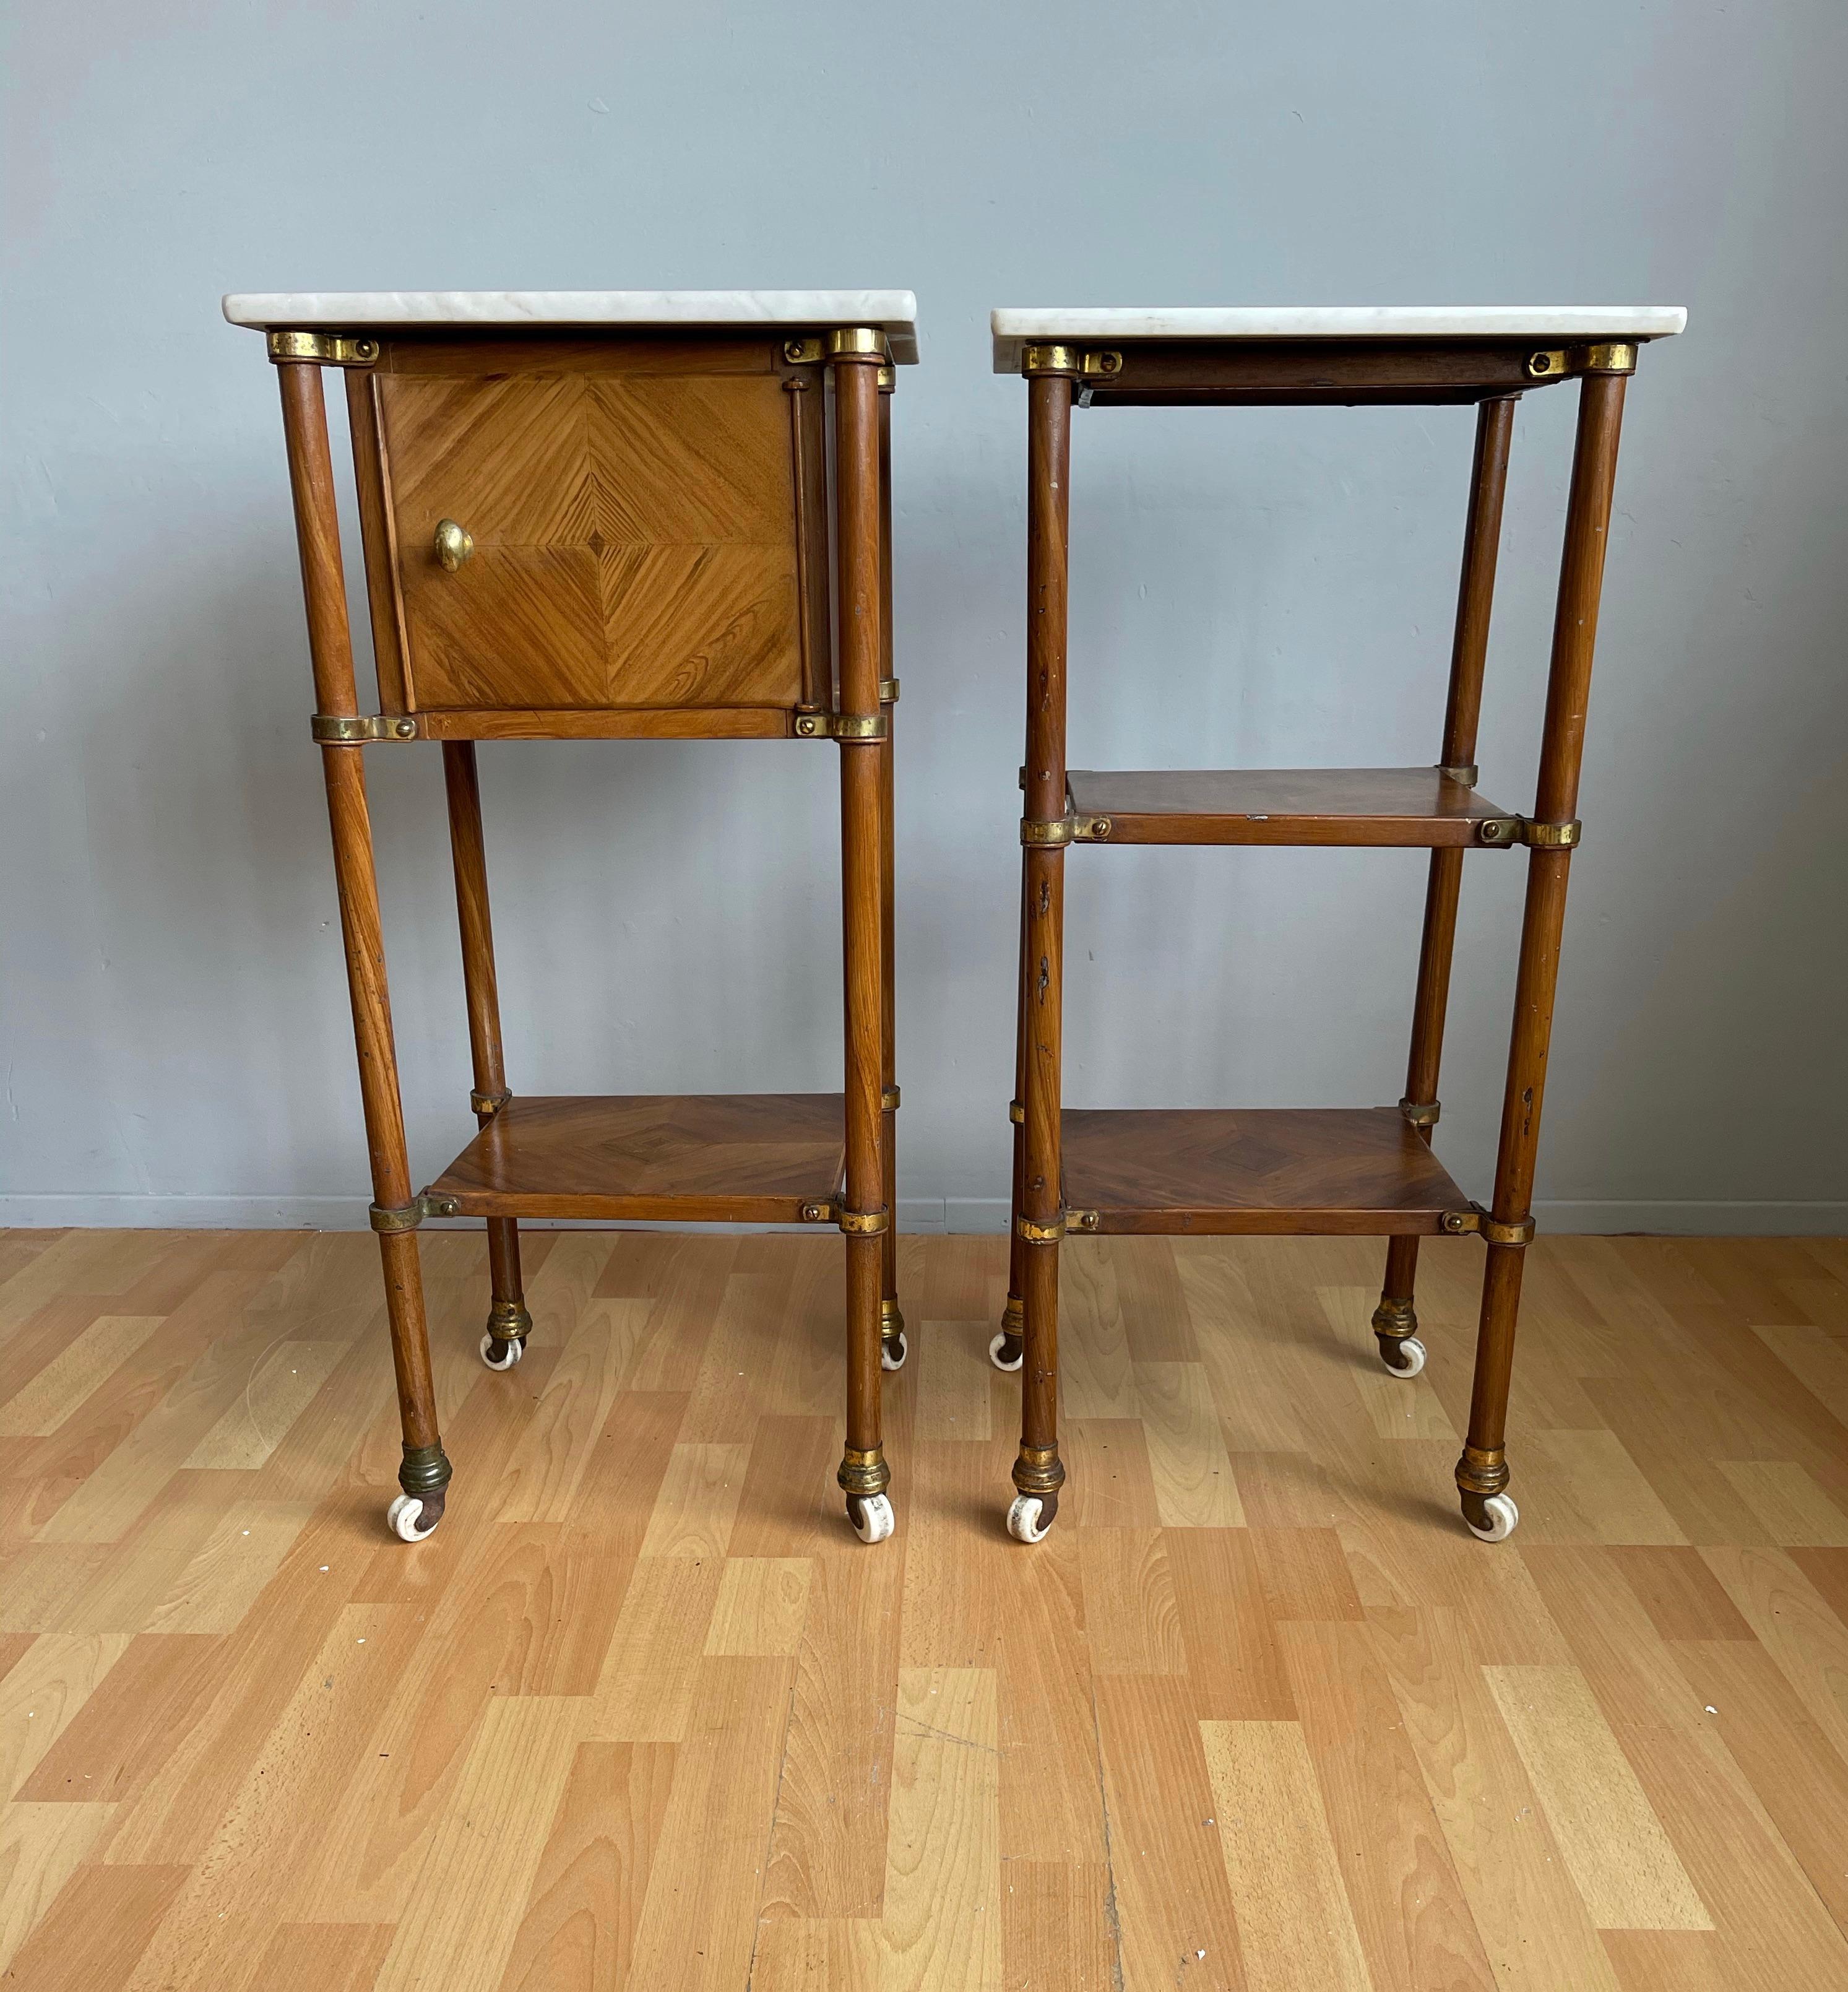 Incredibly stylish pair of metal bedside cabinets with marble tops and porcelain wheels.

When we first saw these remarkable bedside cabinets, we were only standing 5 feet away from them and we thought that they were actually made of wood. The hand